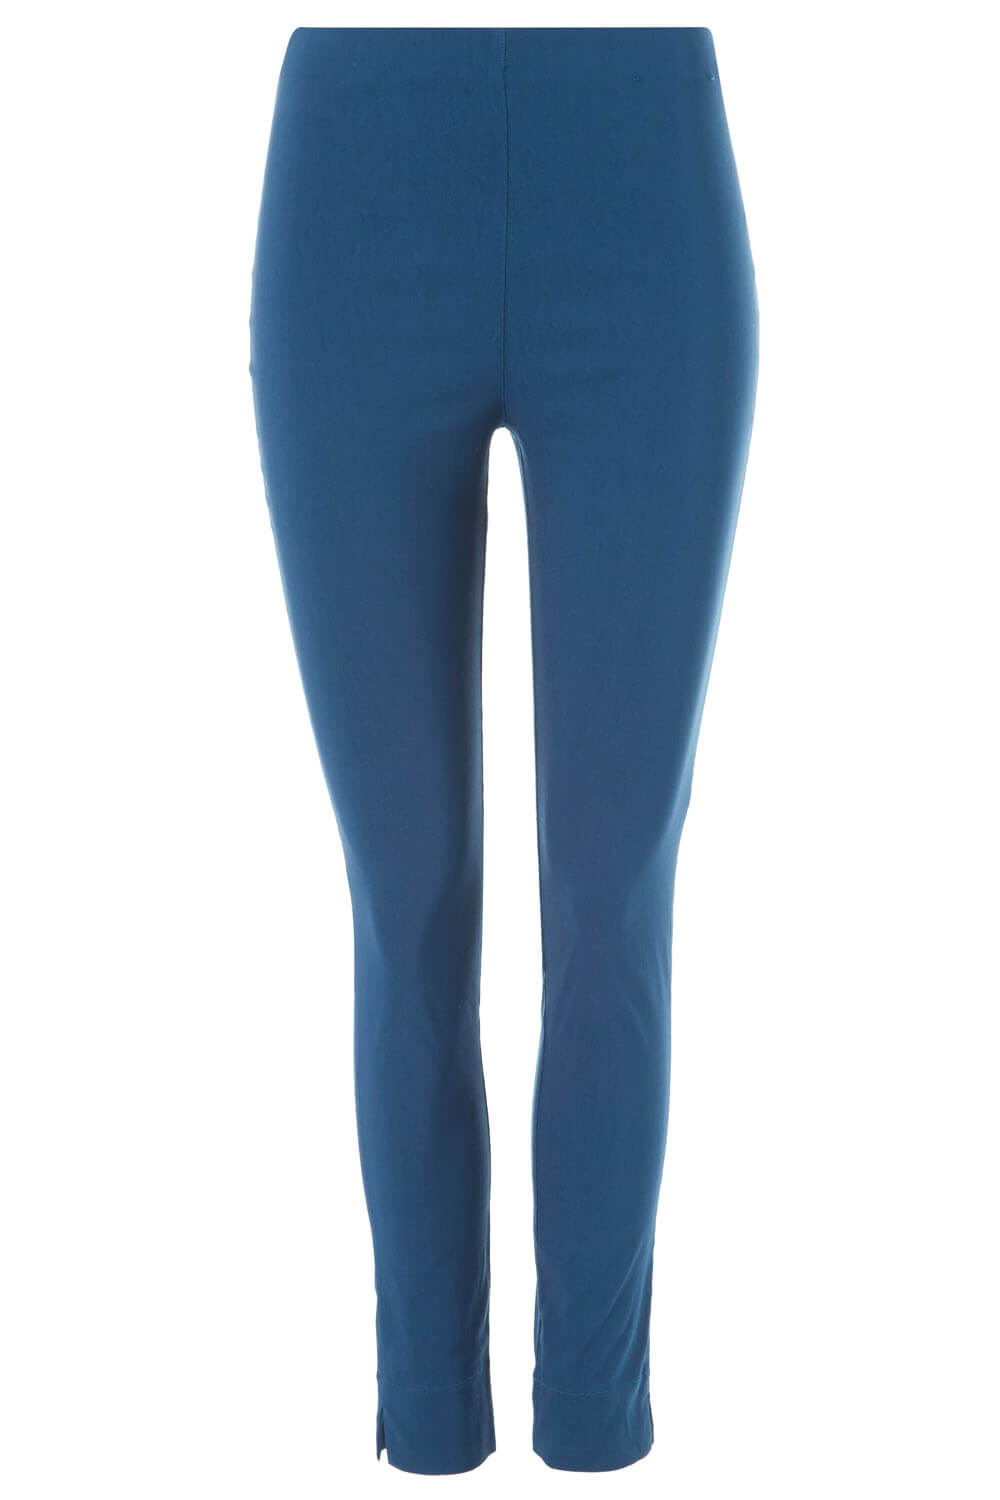 Teal Full Length Stretch Trousers, Image 5 of 5